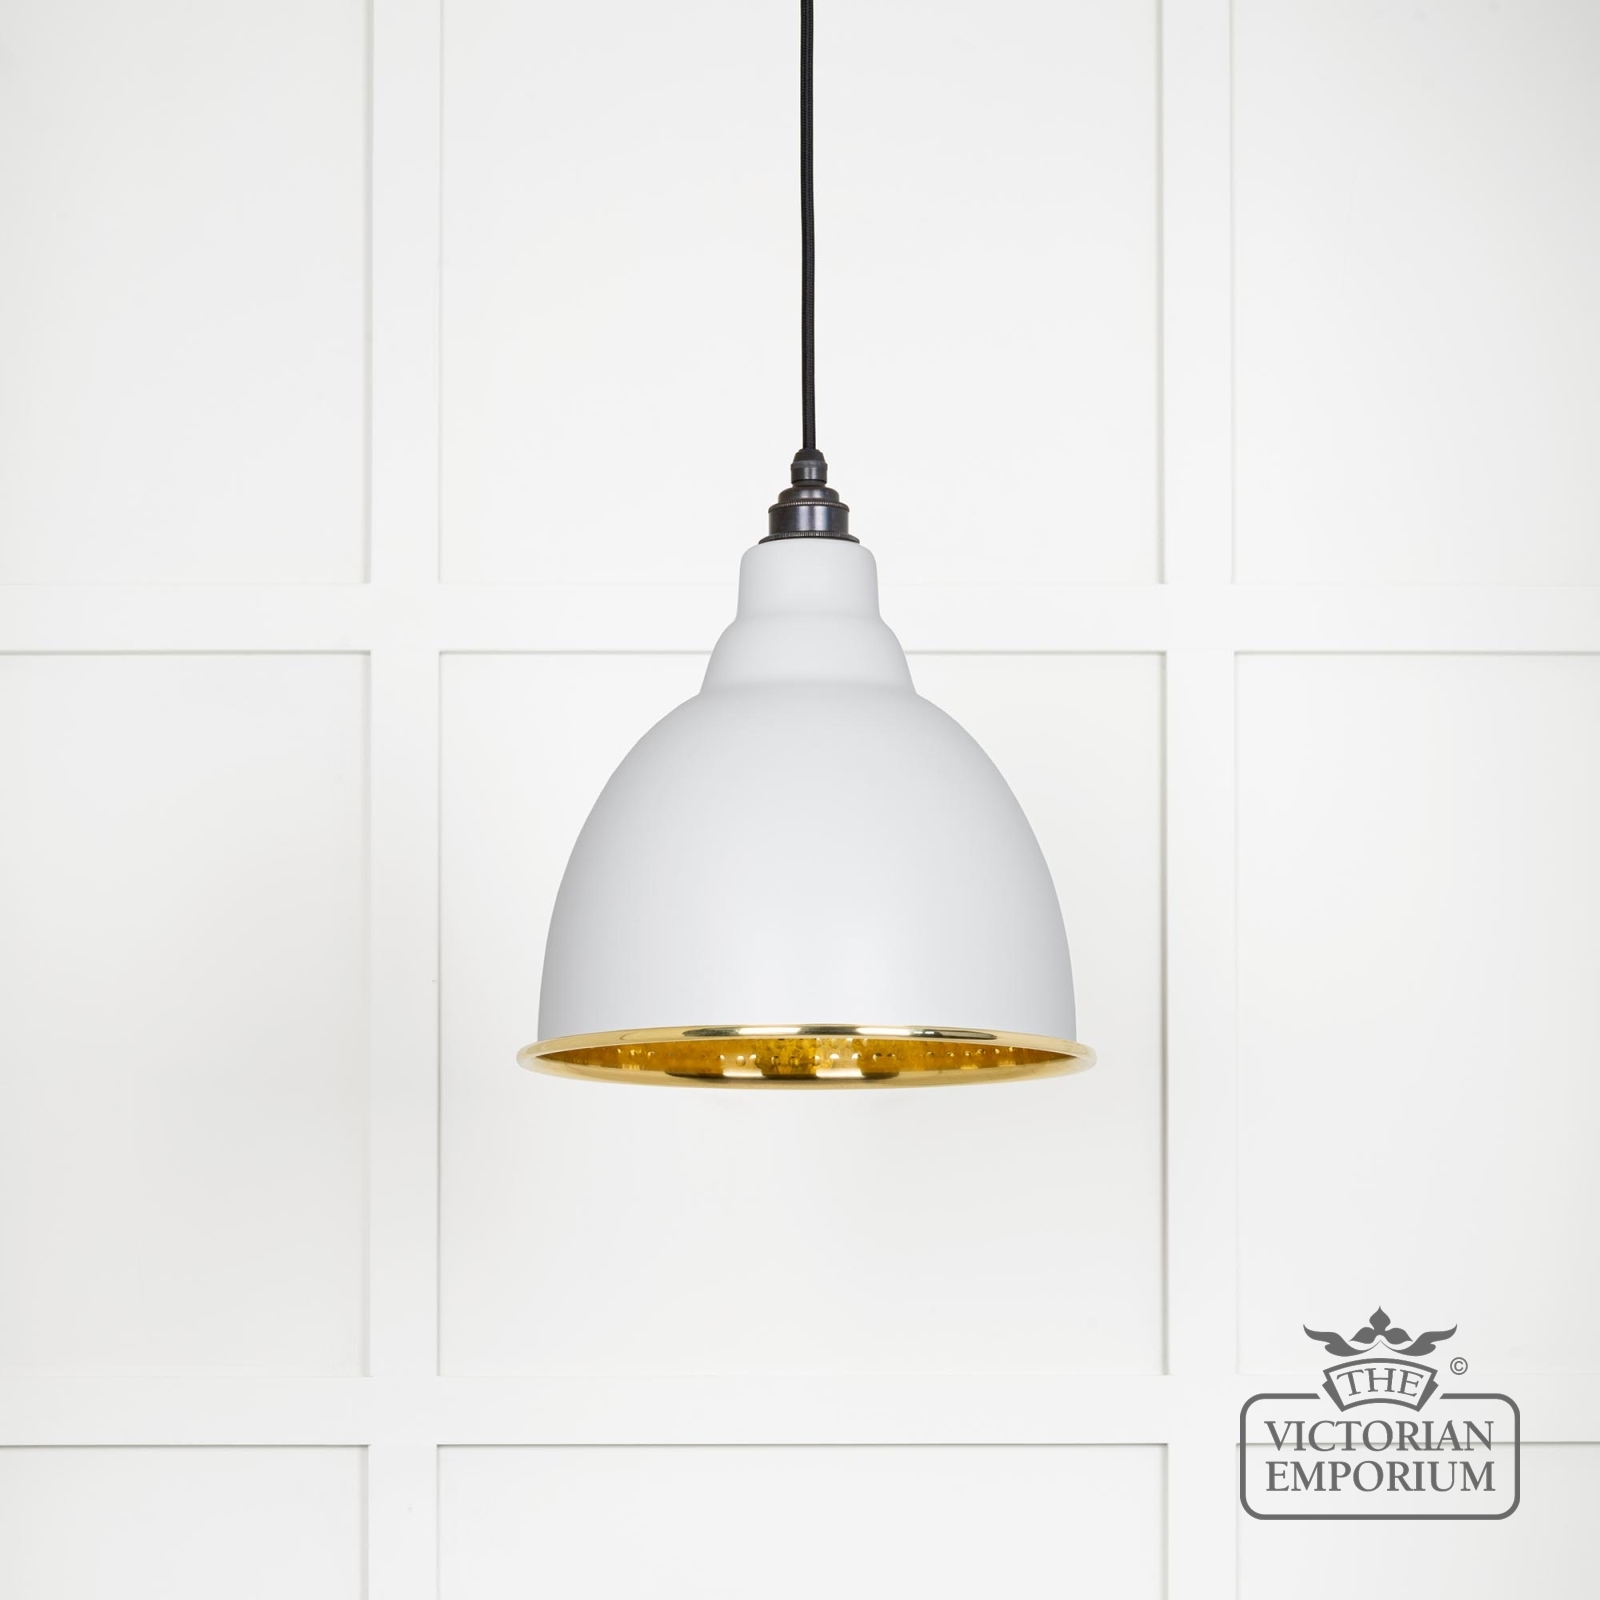 Brindle pendant light in Flock with hammered brass interior